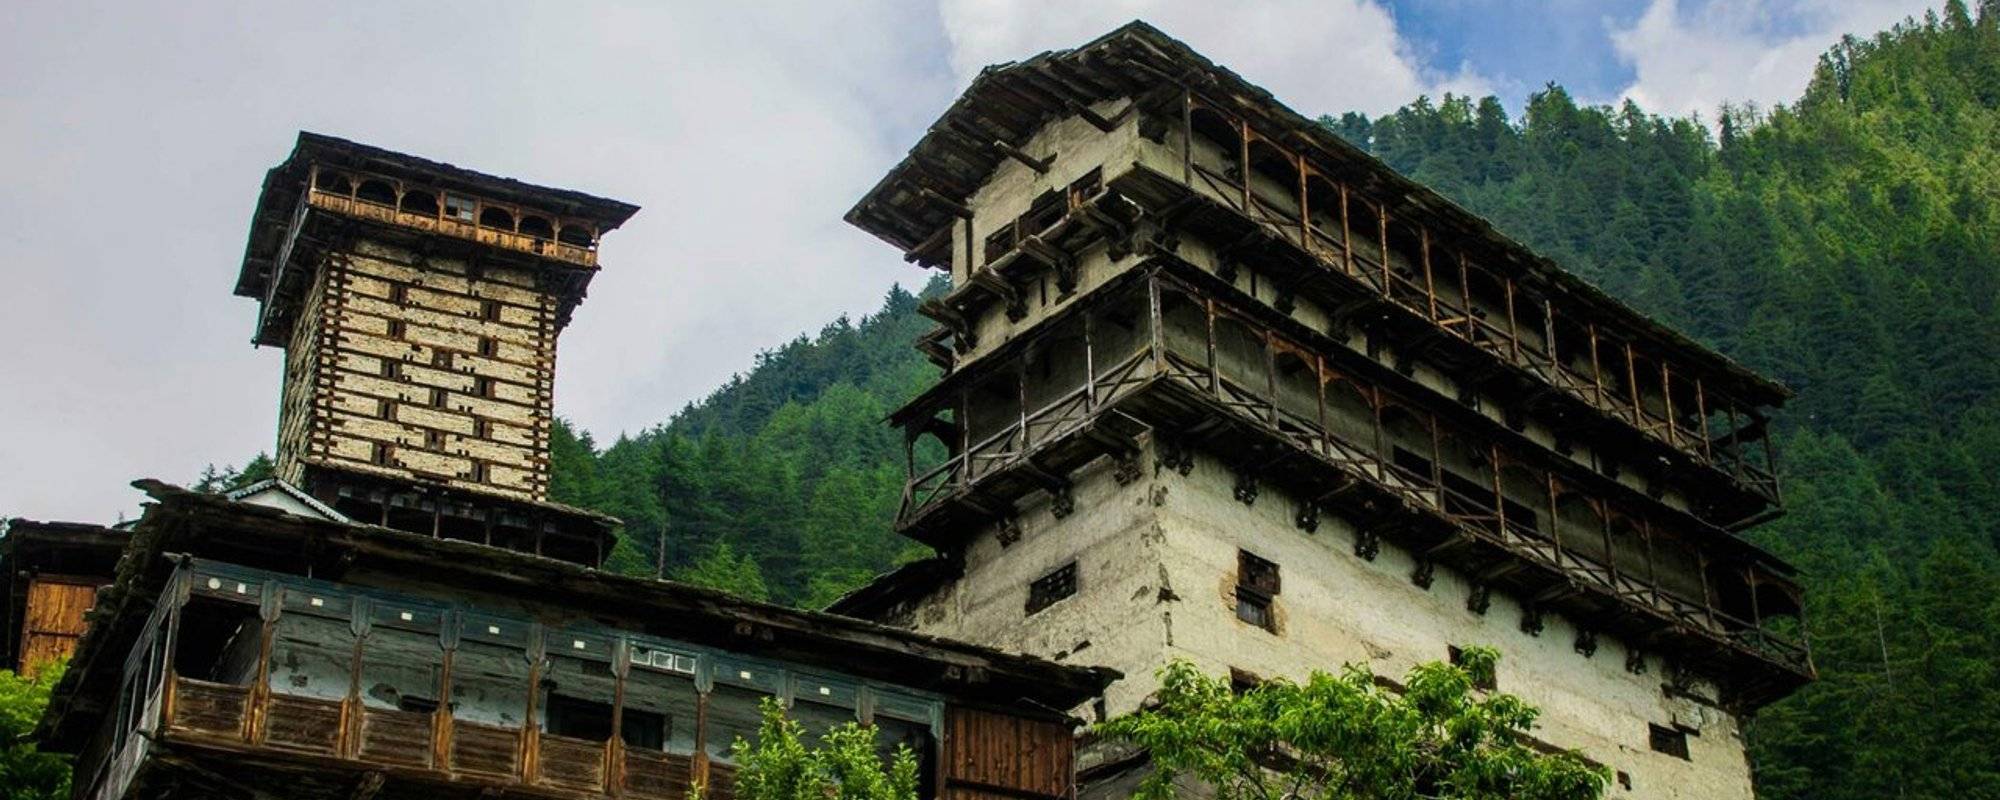 The Tower Temple Of Western Himalayas